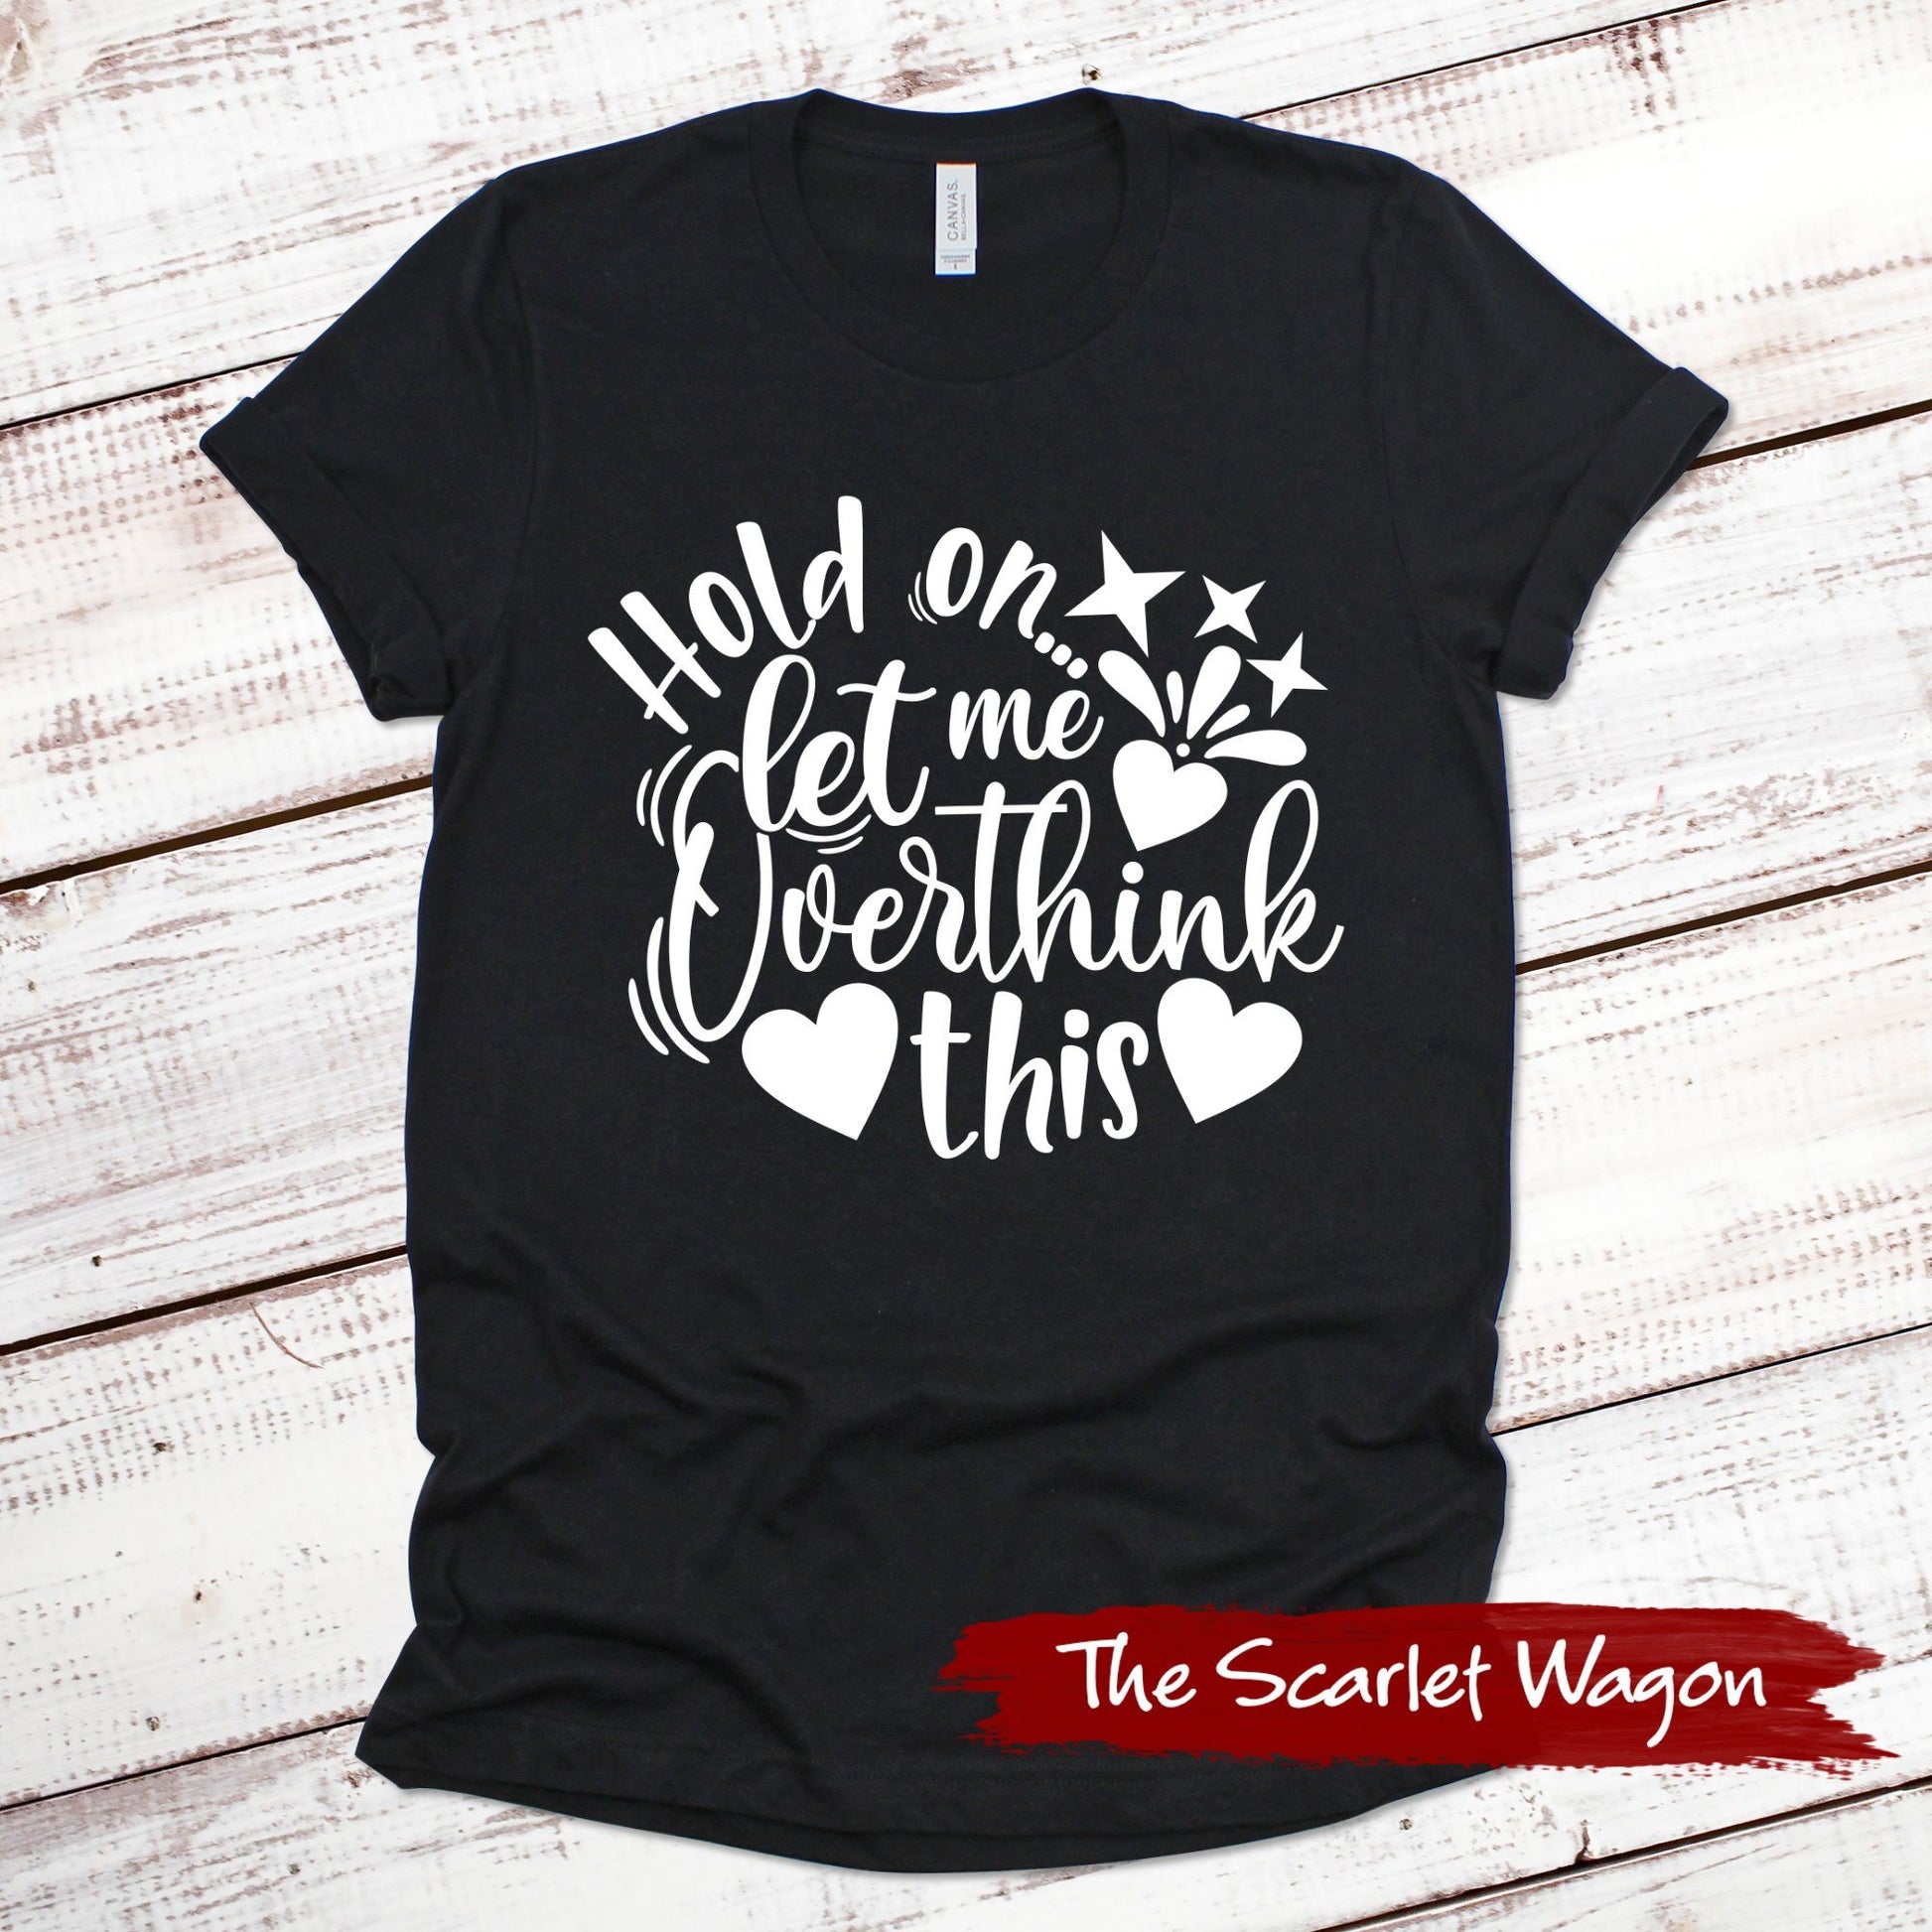 Hold On Let Me Overthink This Funny Shirt Scarlet Wagon Black XS 